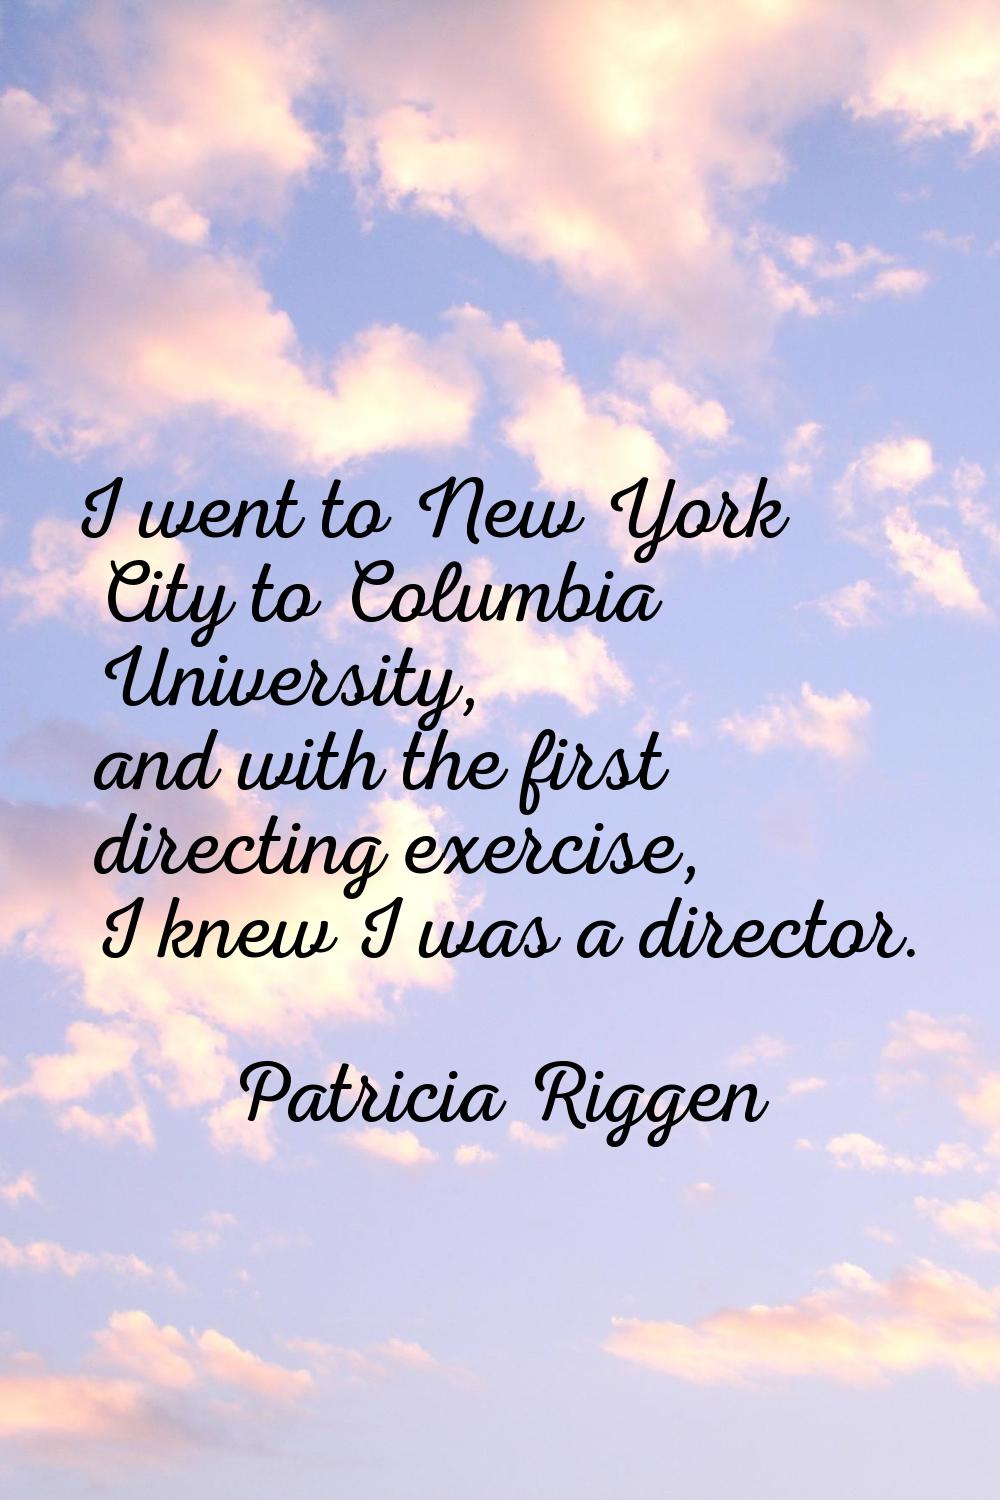 I went to New York City to Columbia University, and with the first directing exercise, I knew I was